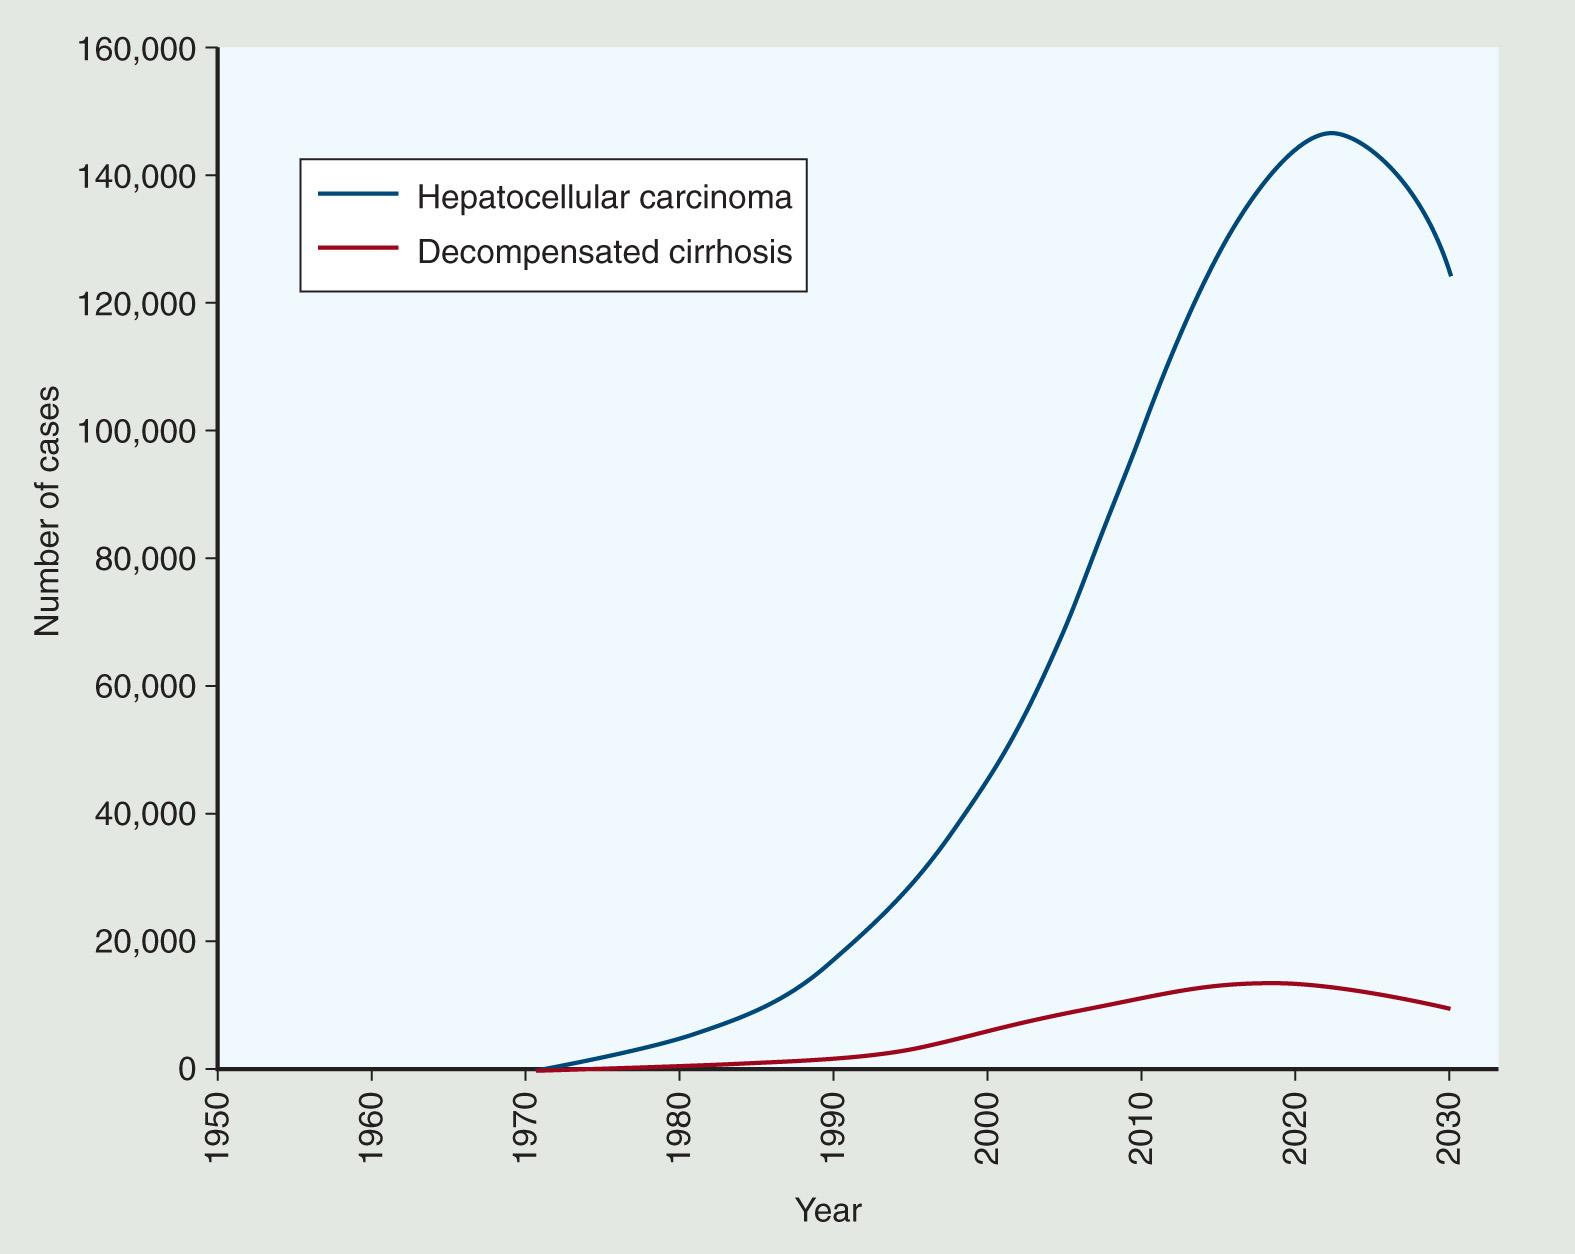 FIGURE 132.2, Projected number of cases by year of decompensated cirrhosis (red line) and hepatocellular carcinoma (blue line) . The model assumes a first-year mortality of 80% to 85%, so in contrast to the decompensated cirrhosis projection, for the number of cases of hepatocellular carcinoma, the prevalence demonstrated here closely resembles annual incidence of liver cancer.